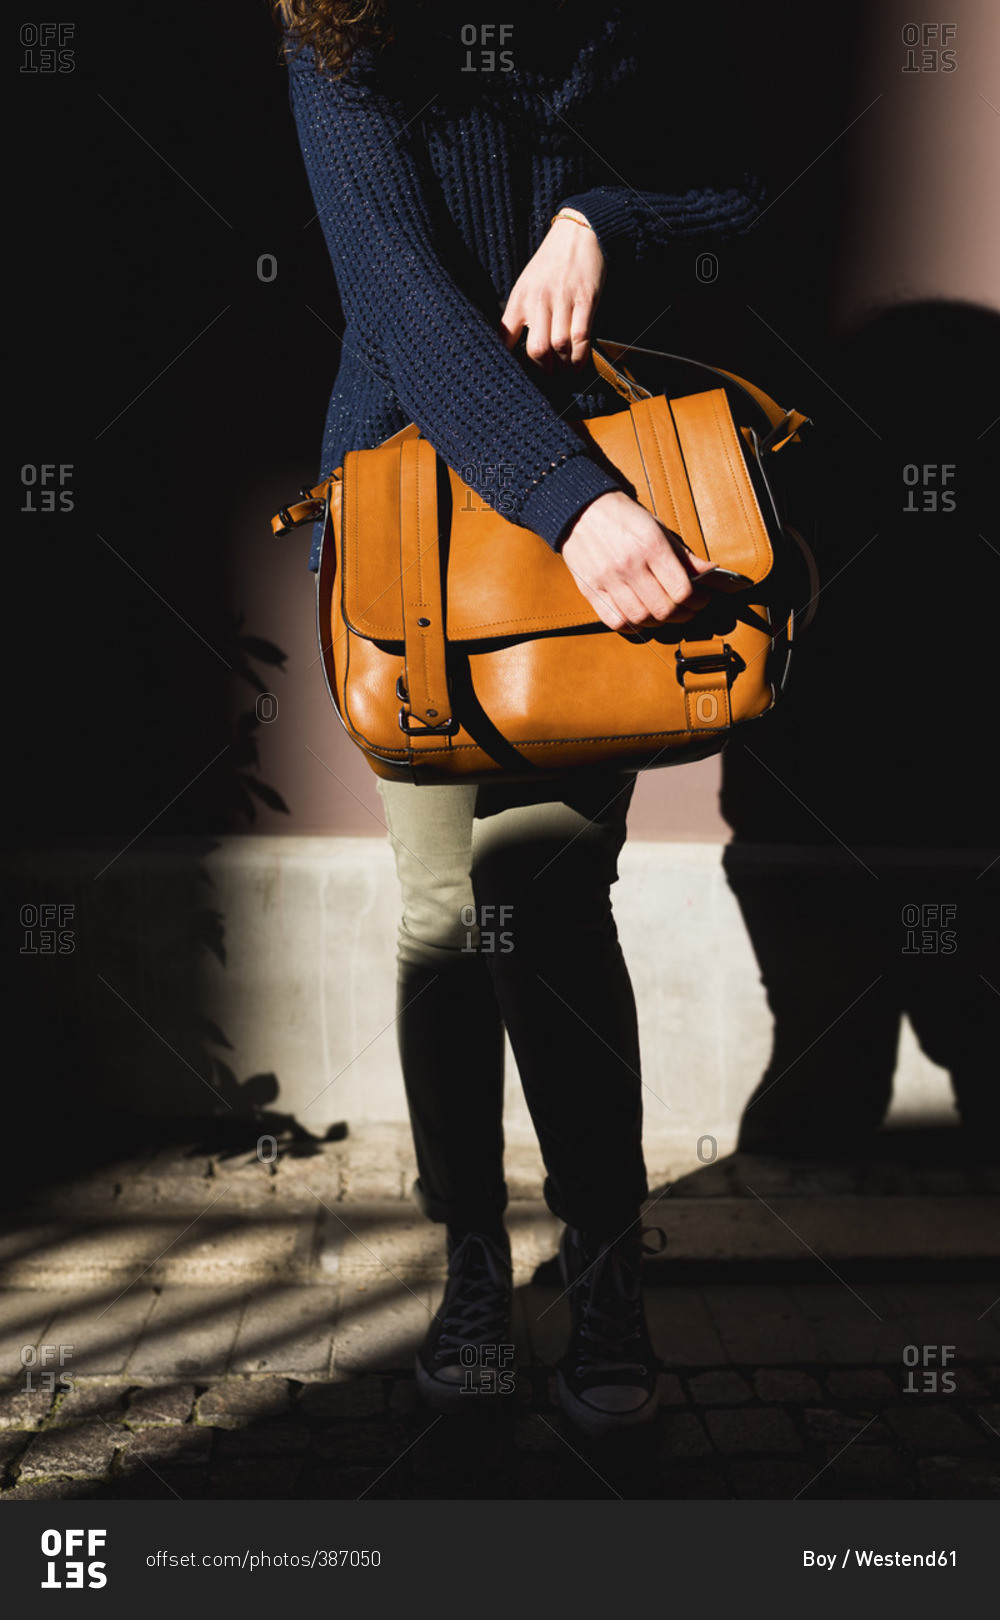 Woman carrying leather bag, partial view